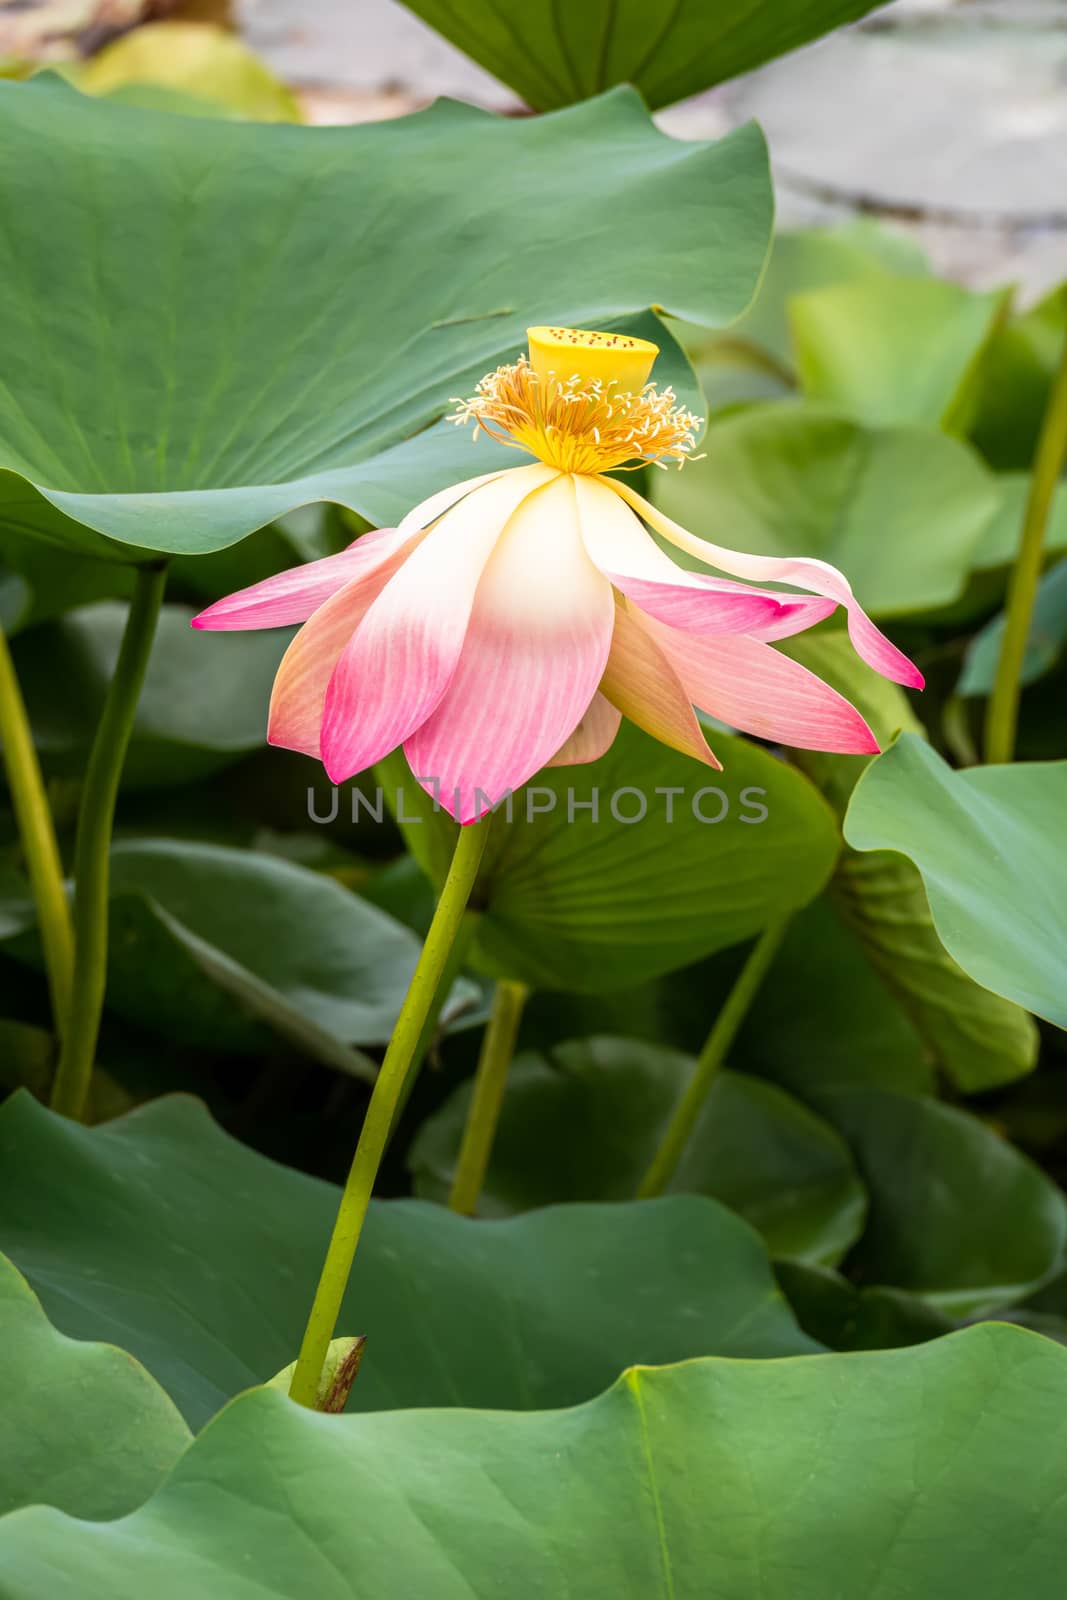 beautiful lotus flower blossom in the garden pond by magann